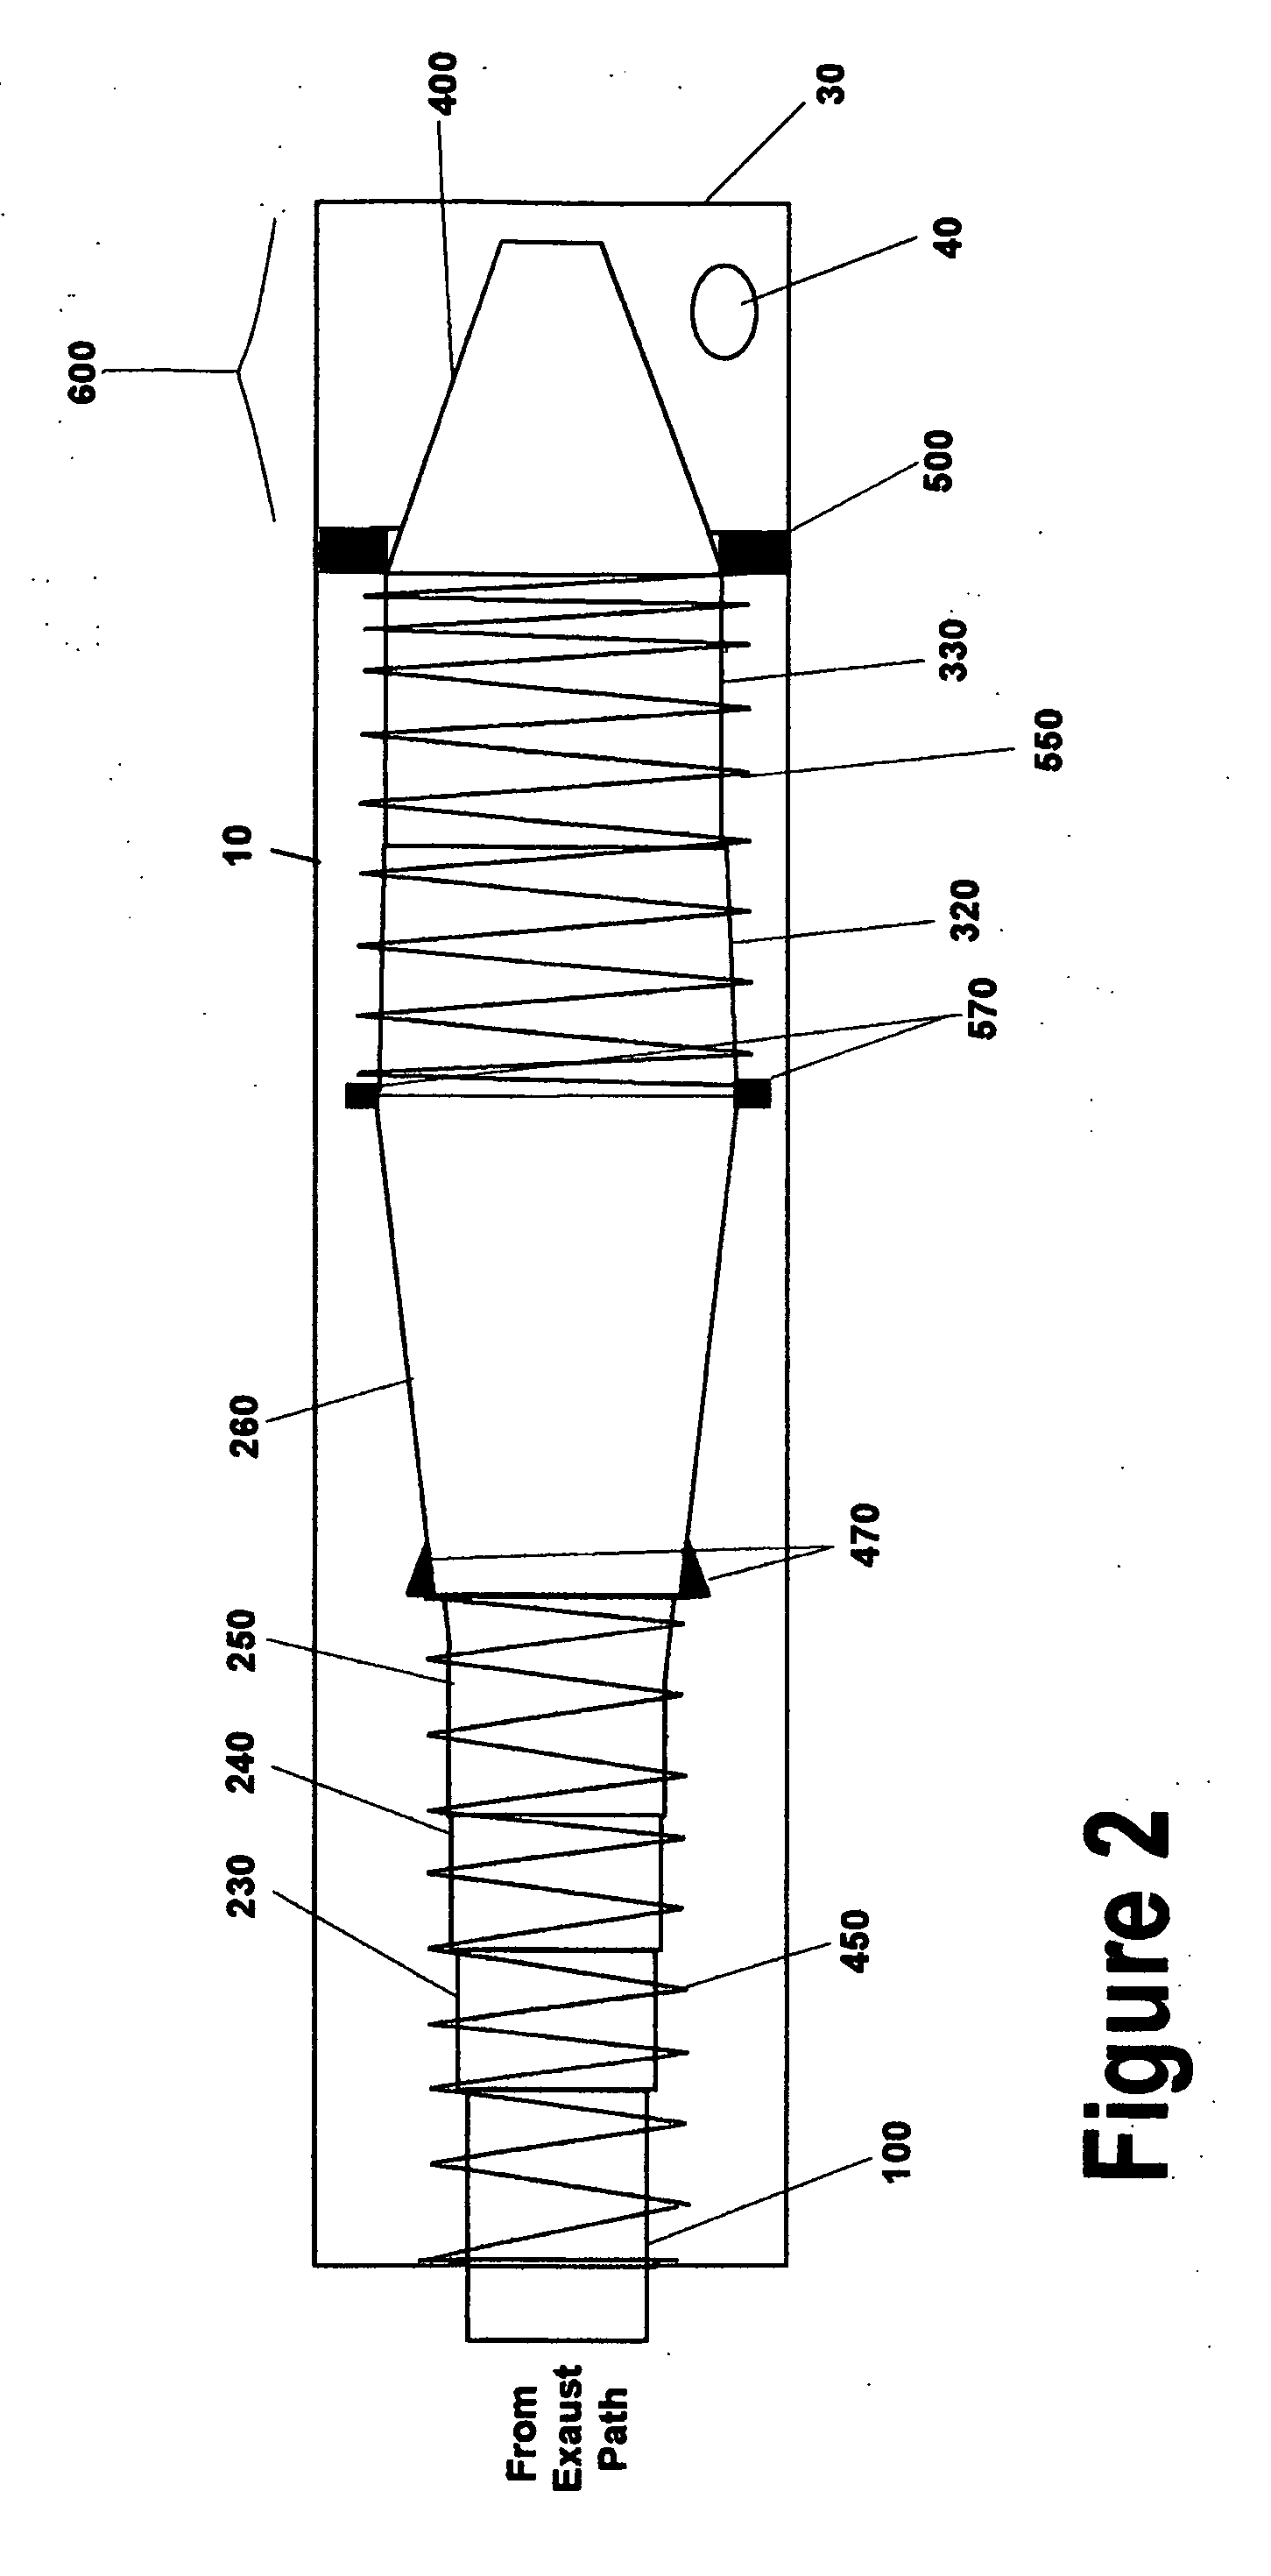 Dynamically adjusting tuned exhaust system